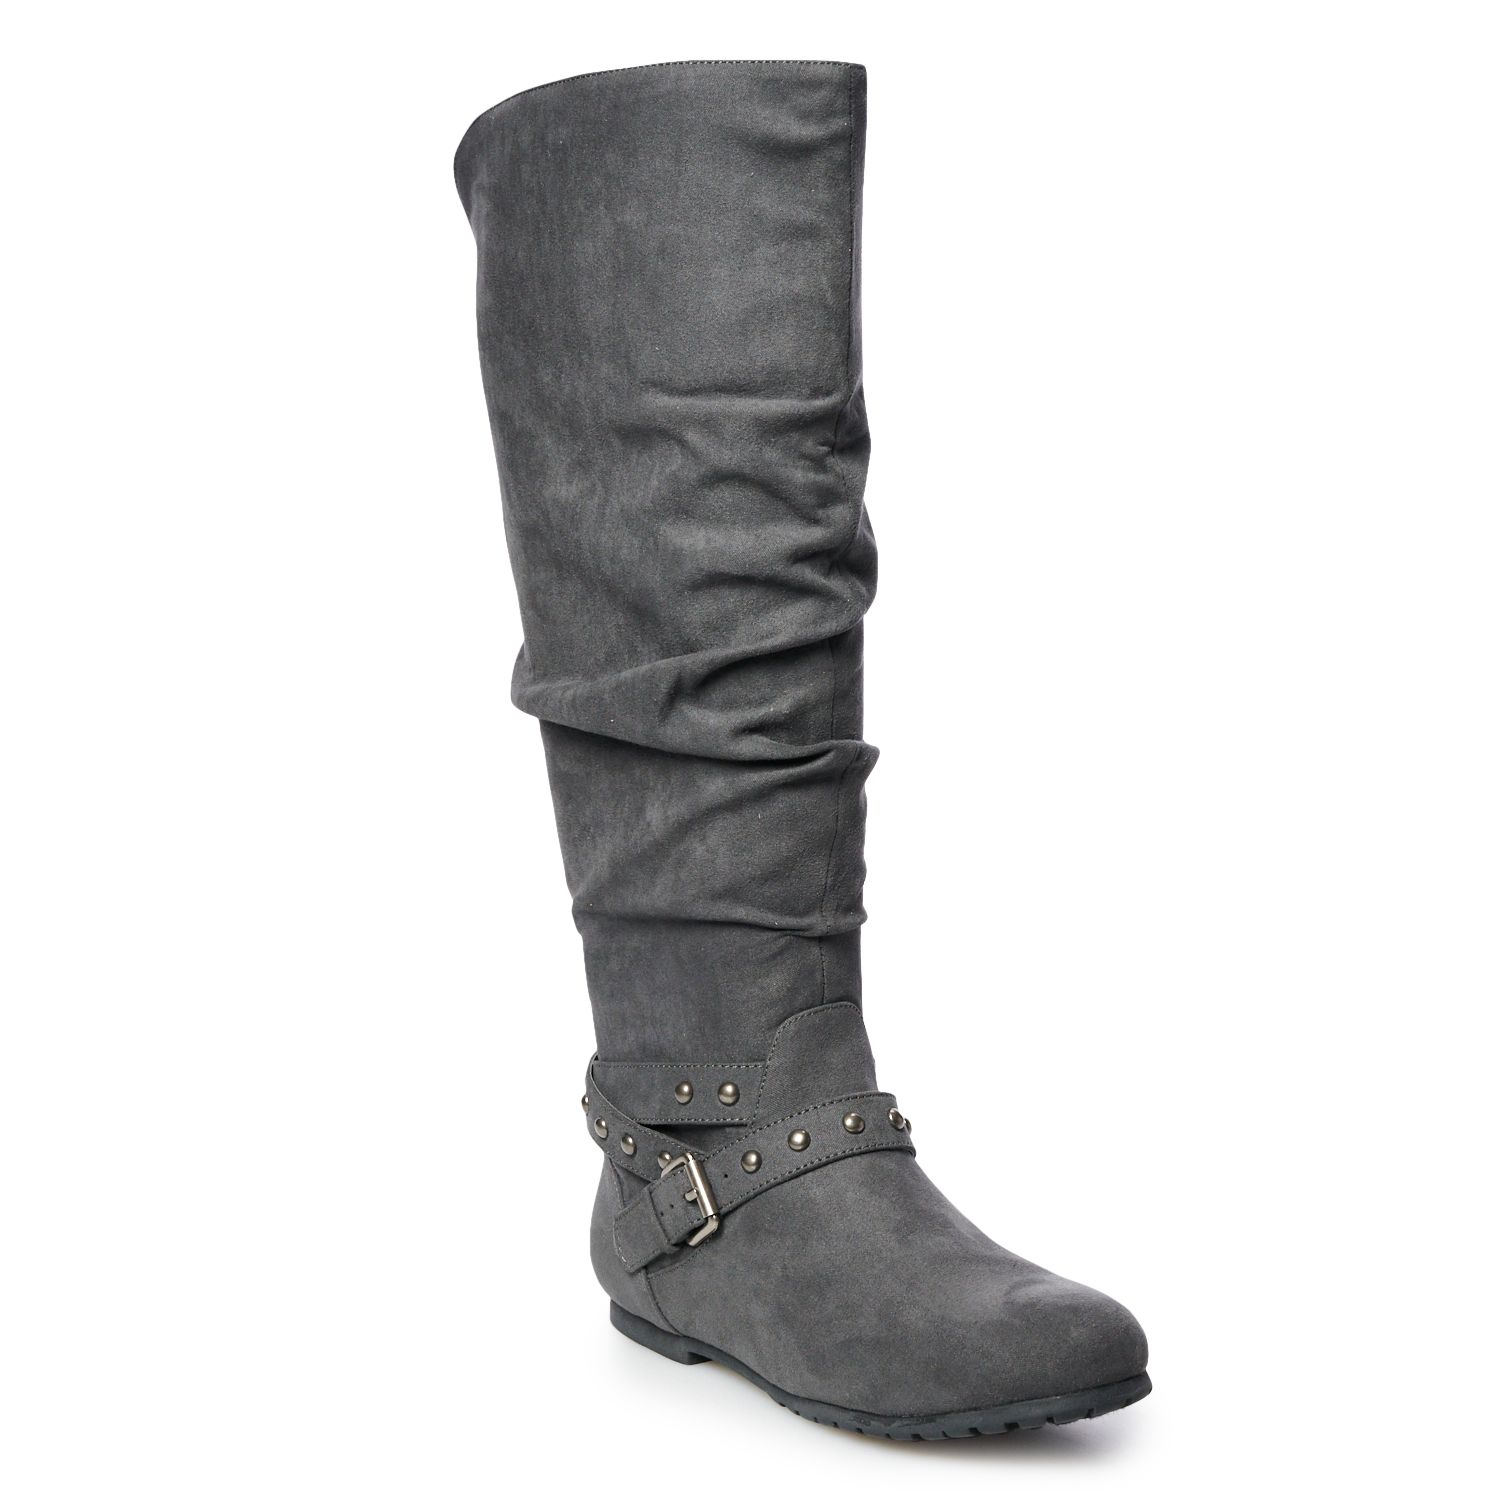 women's high boots on sale